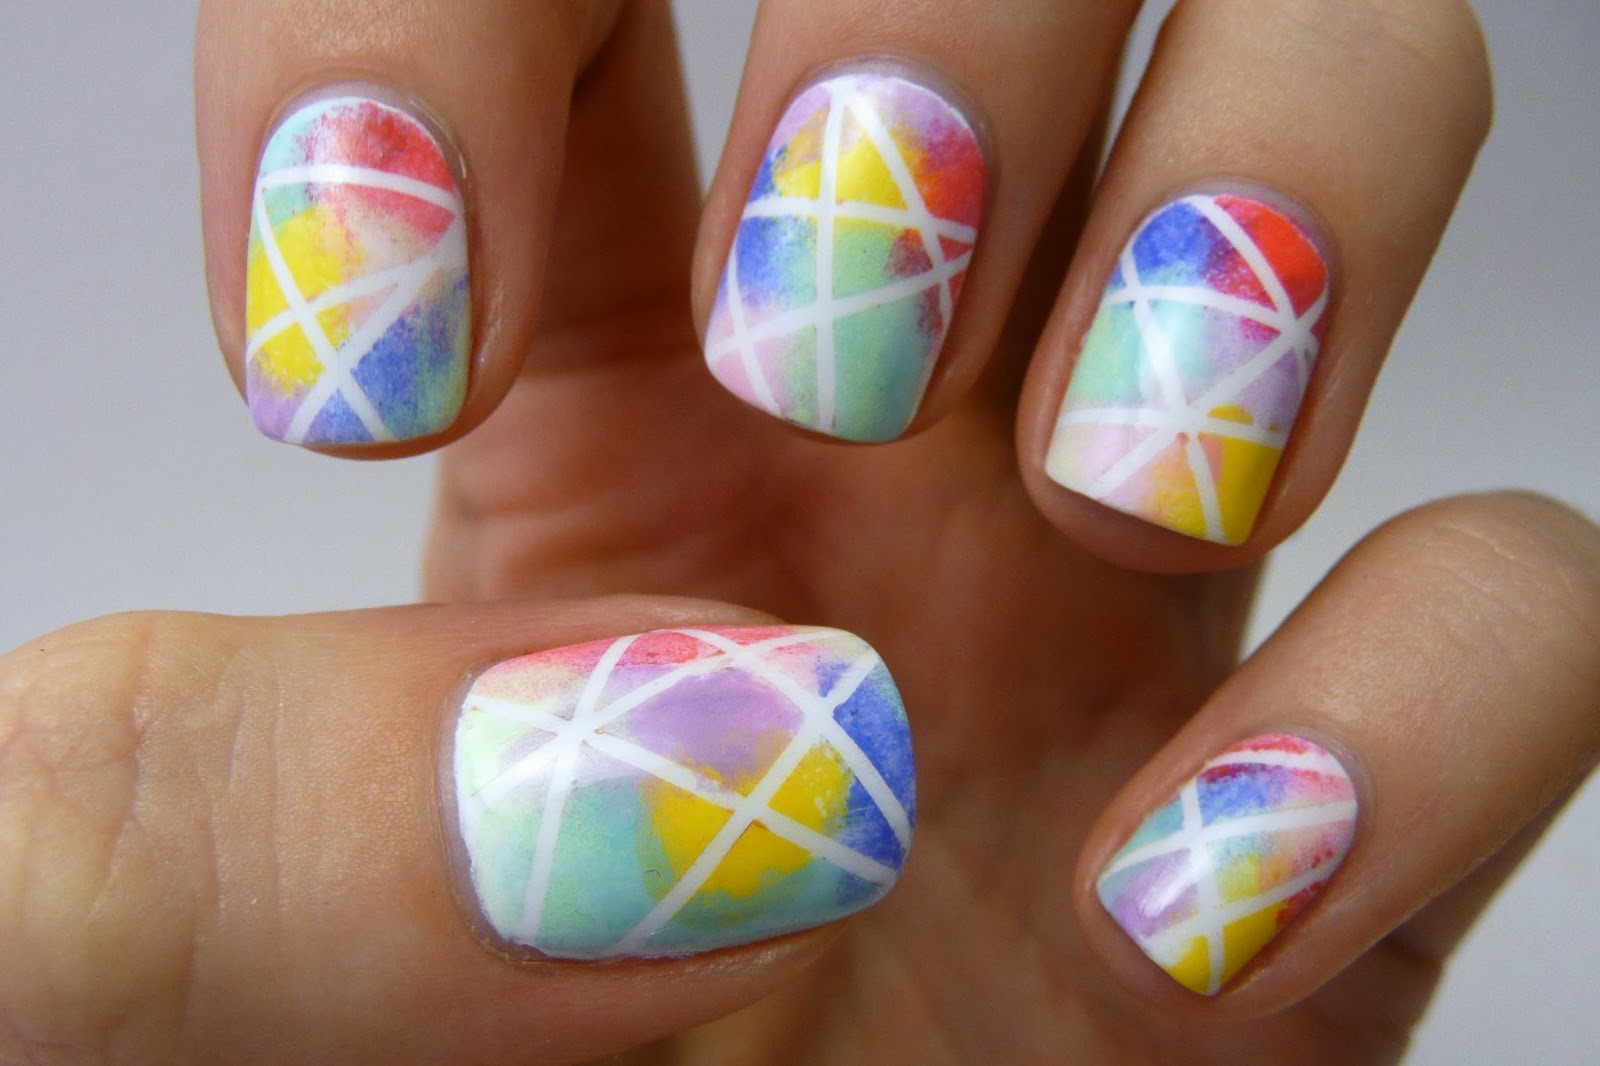 1. How to Use Nail Art Striping Tape for Perfect Designs - wide 7